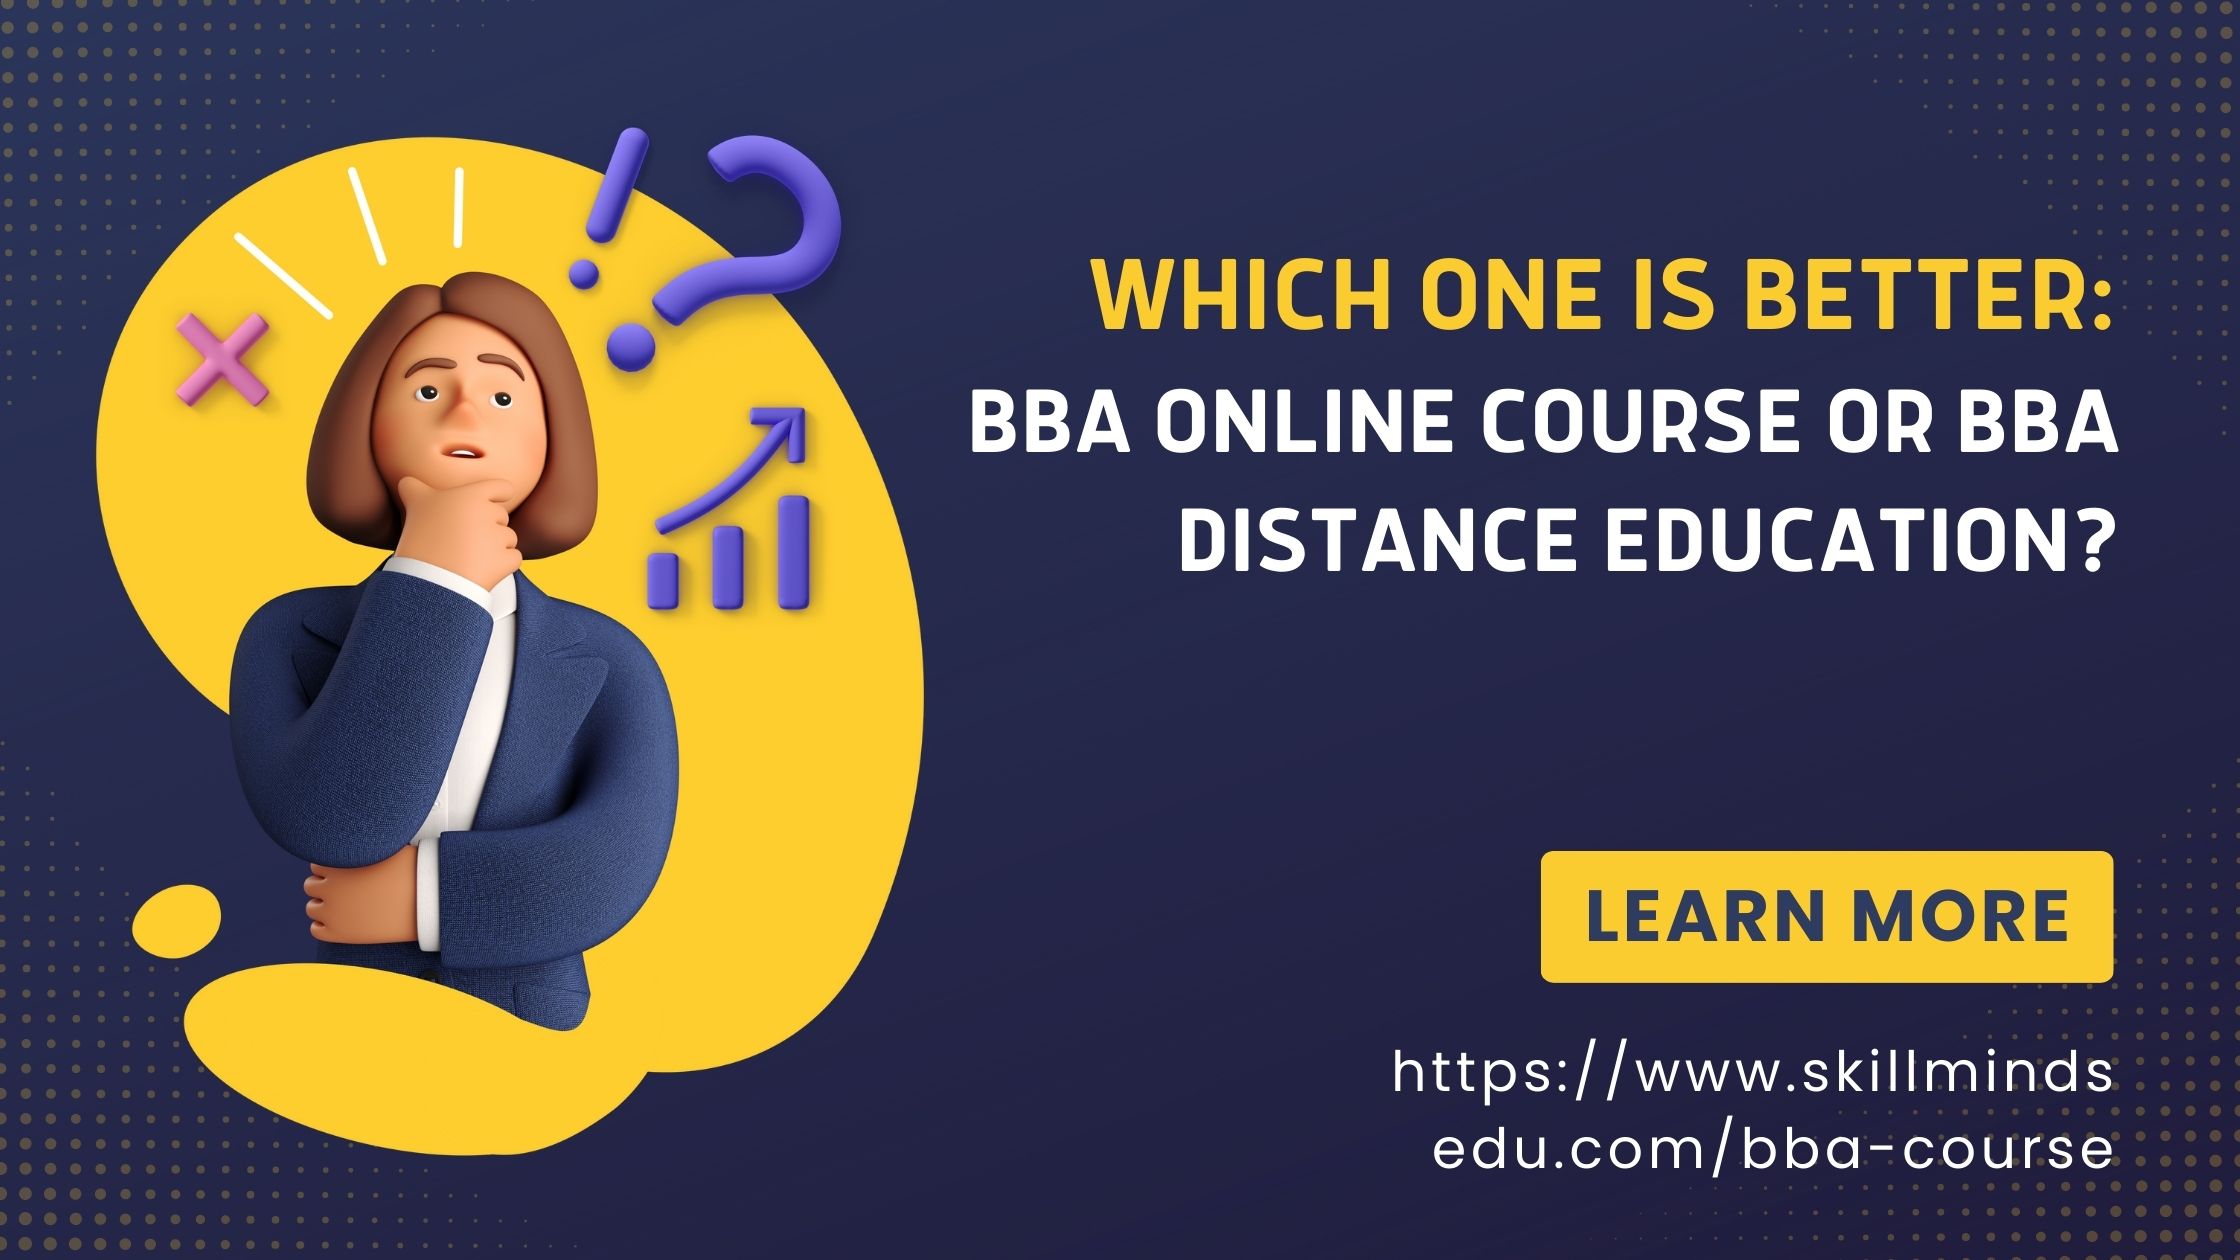 Which one is better: BBA Online course or BBA Distance Education?